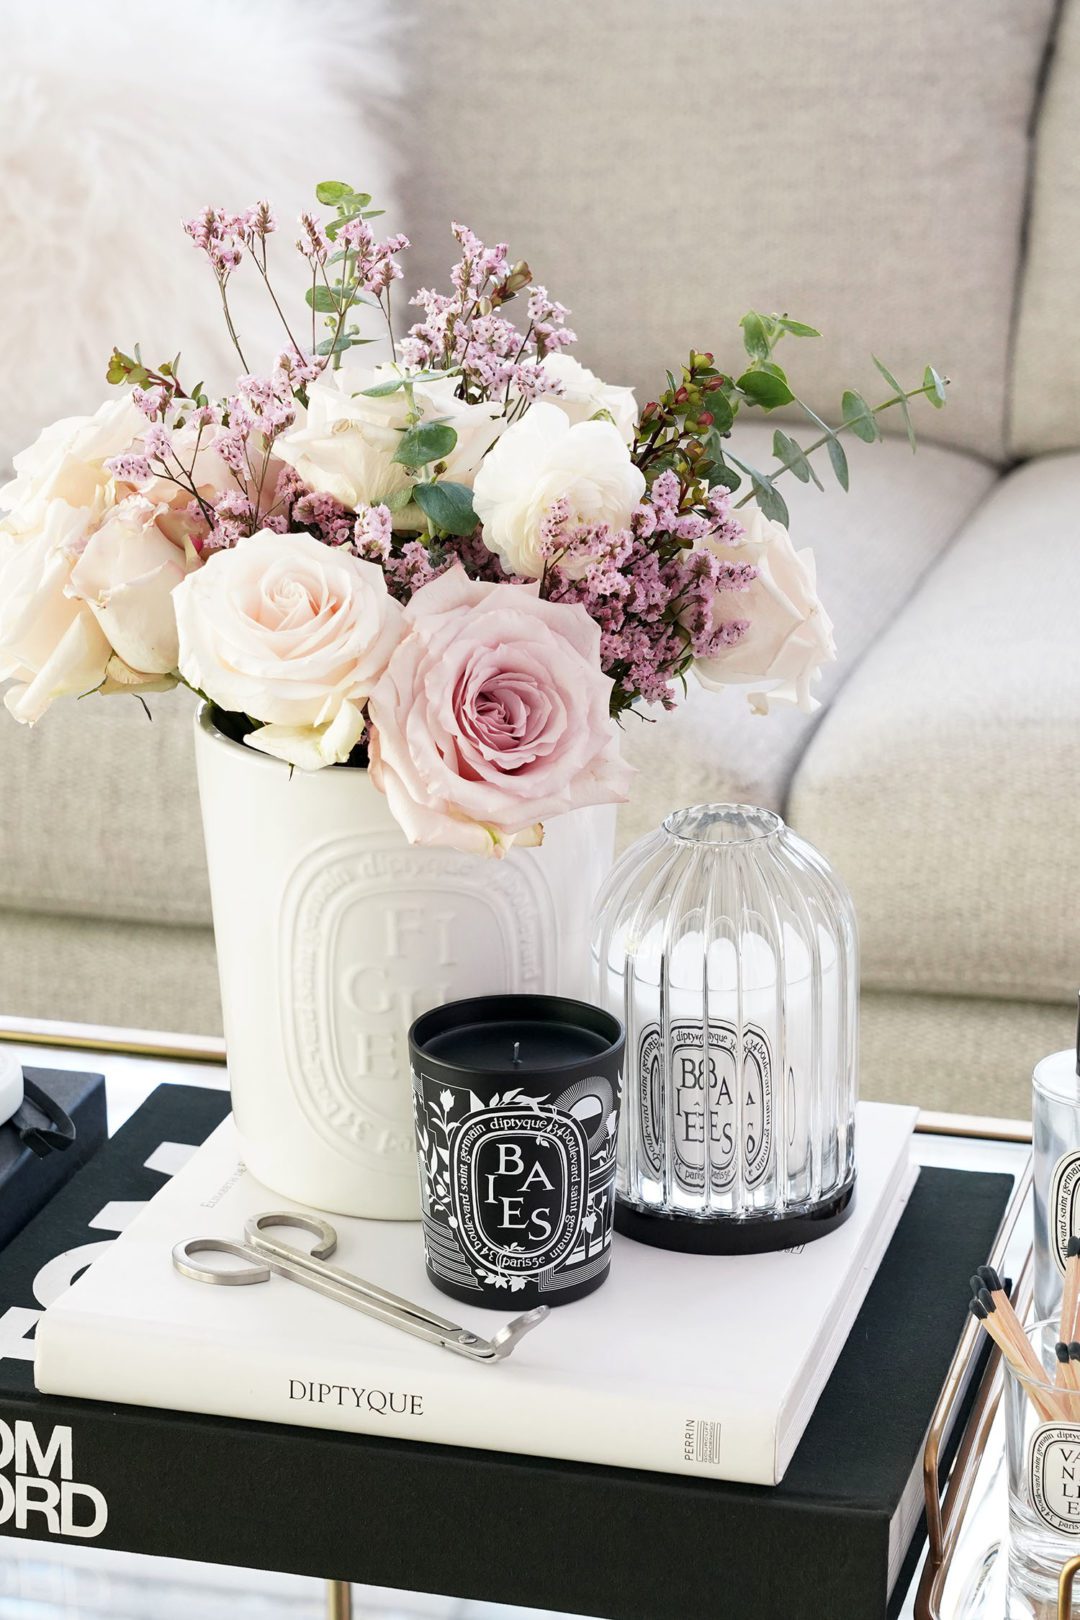 Diptyque Limited-Edition Baies Candle 2020 - The Beauty Look Book